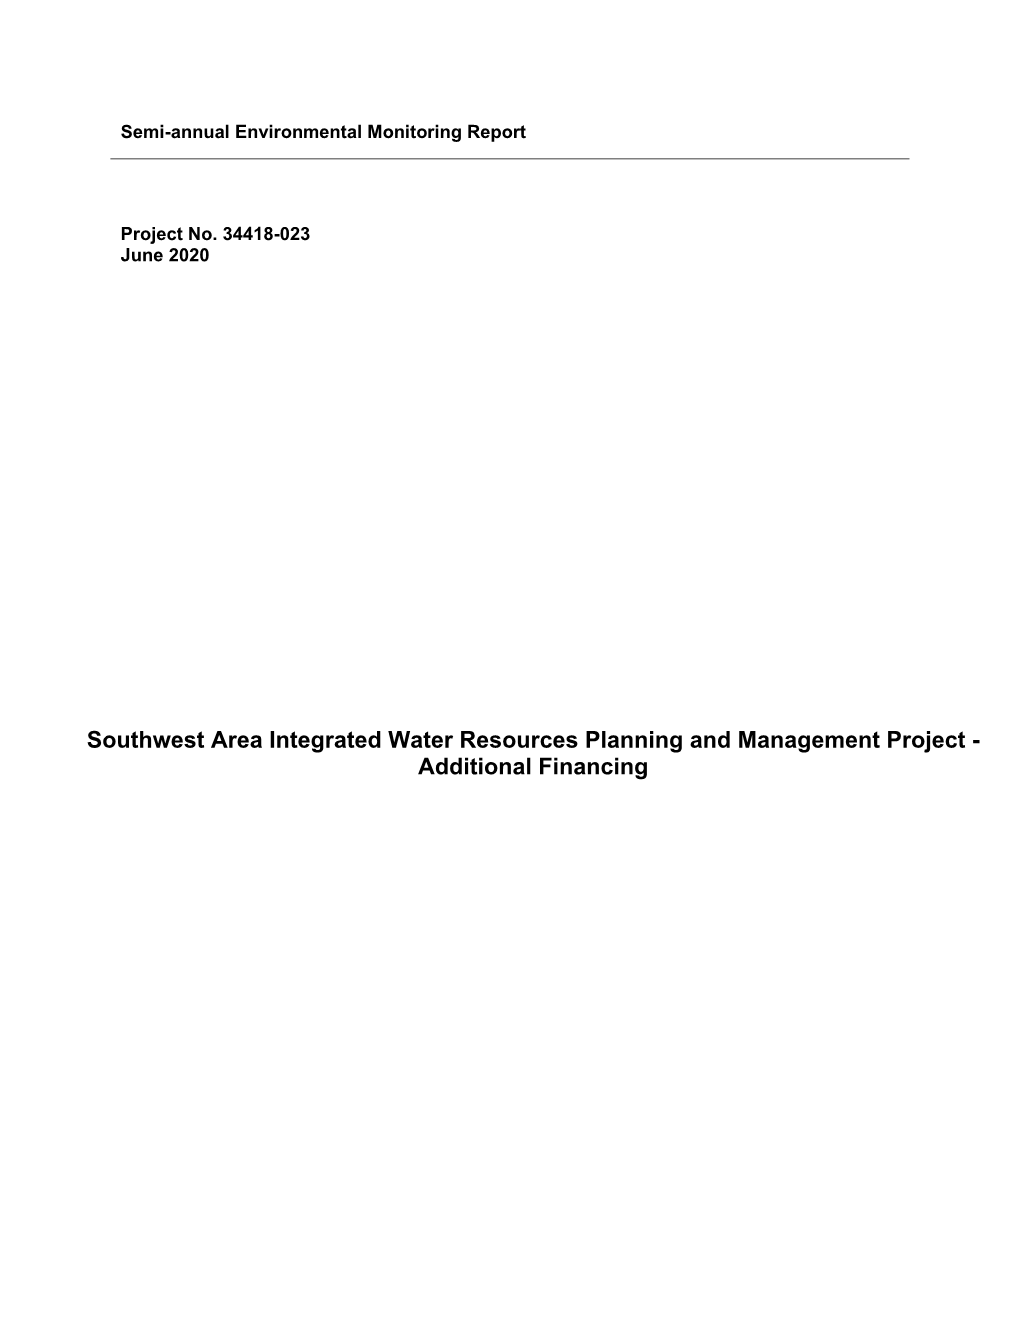 Additional Financing This Semi-Annual Environmental Monitoring Report Is a Document of the Borrower